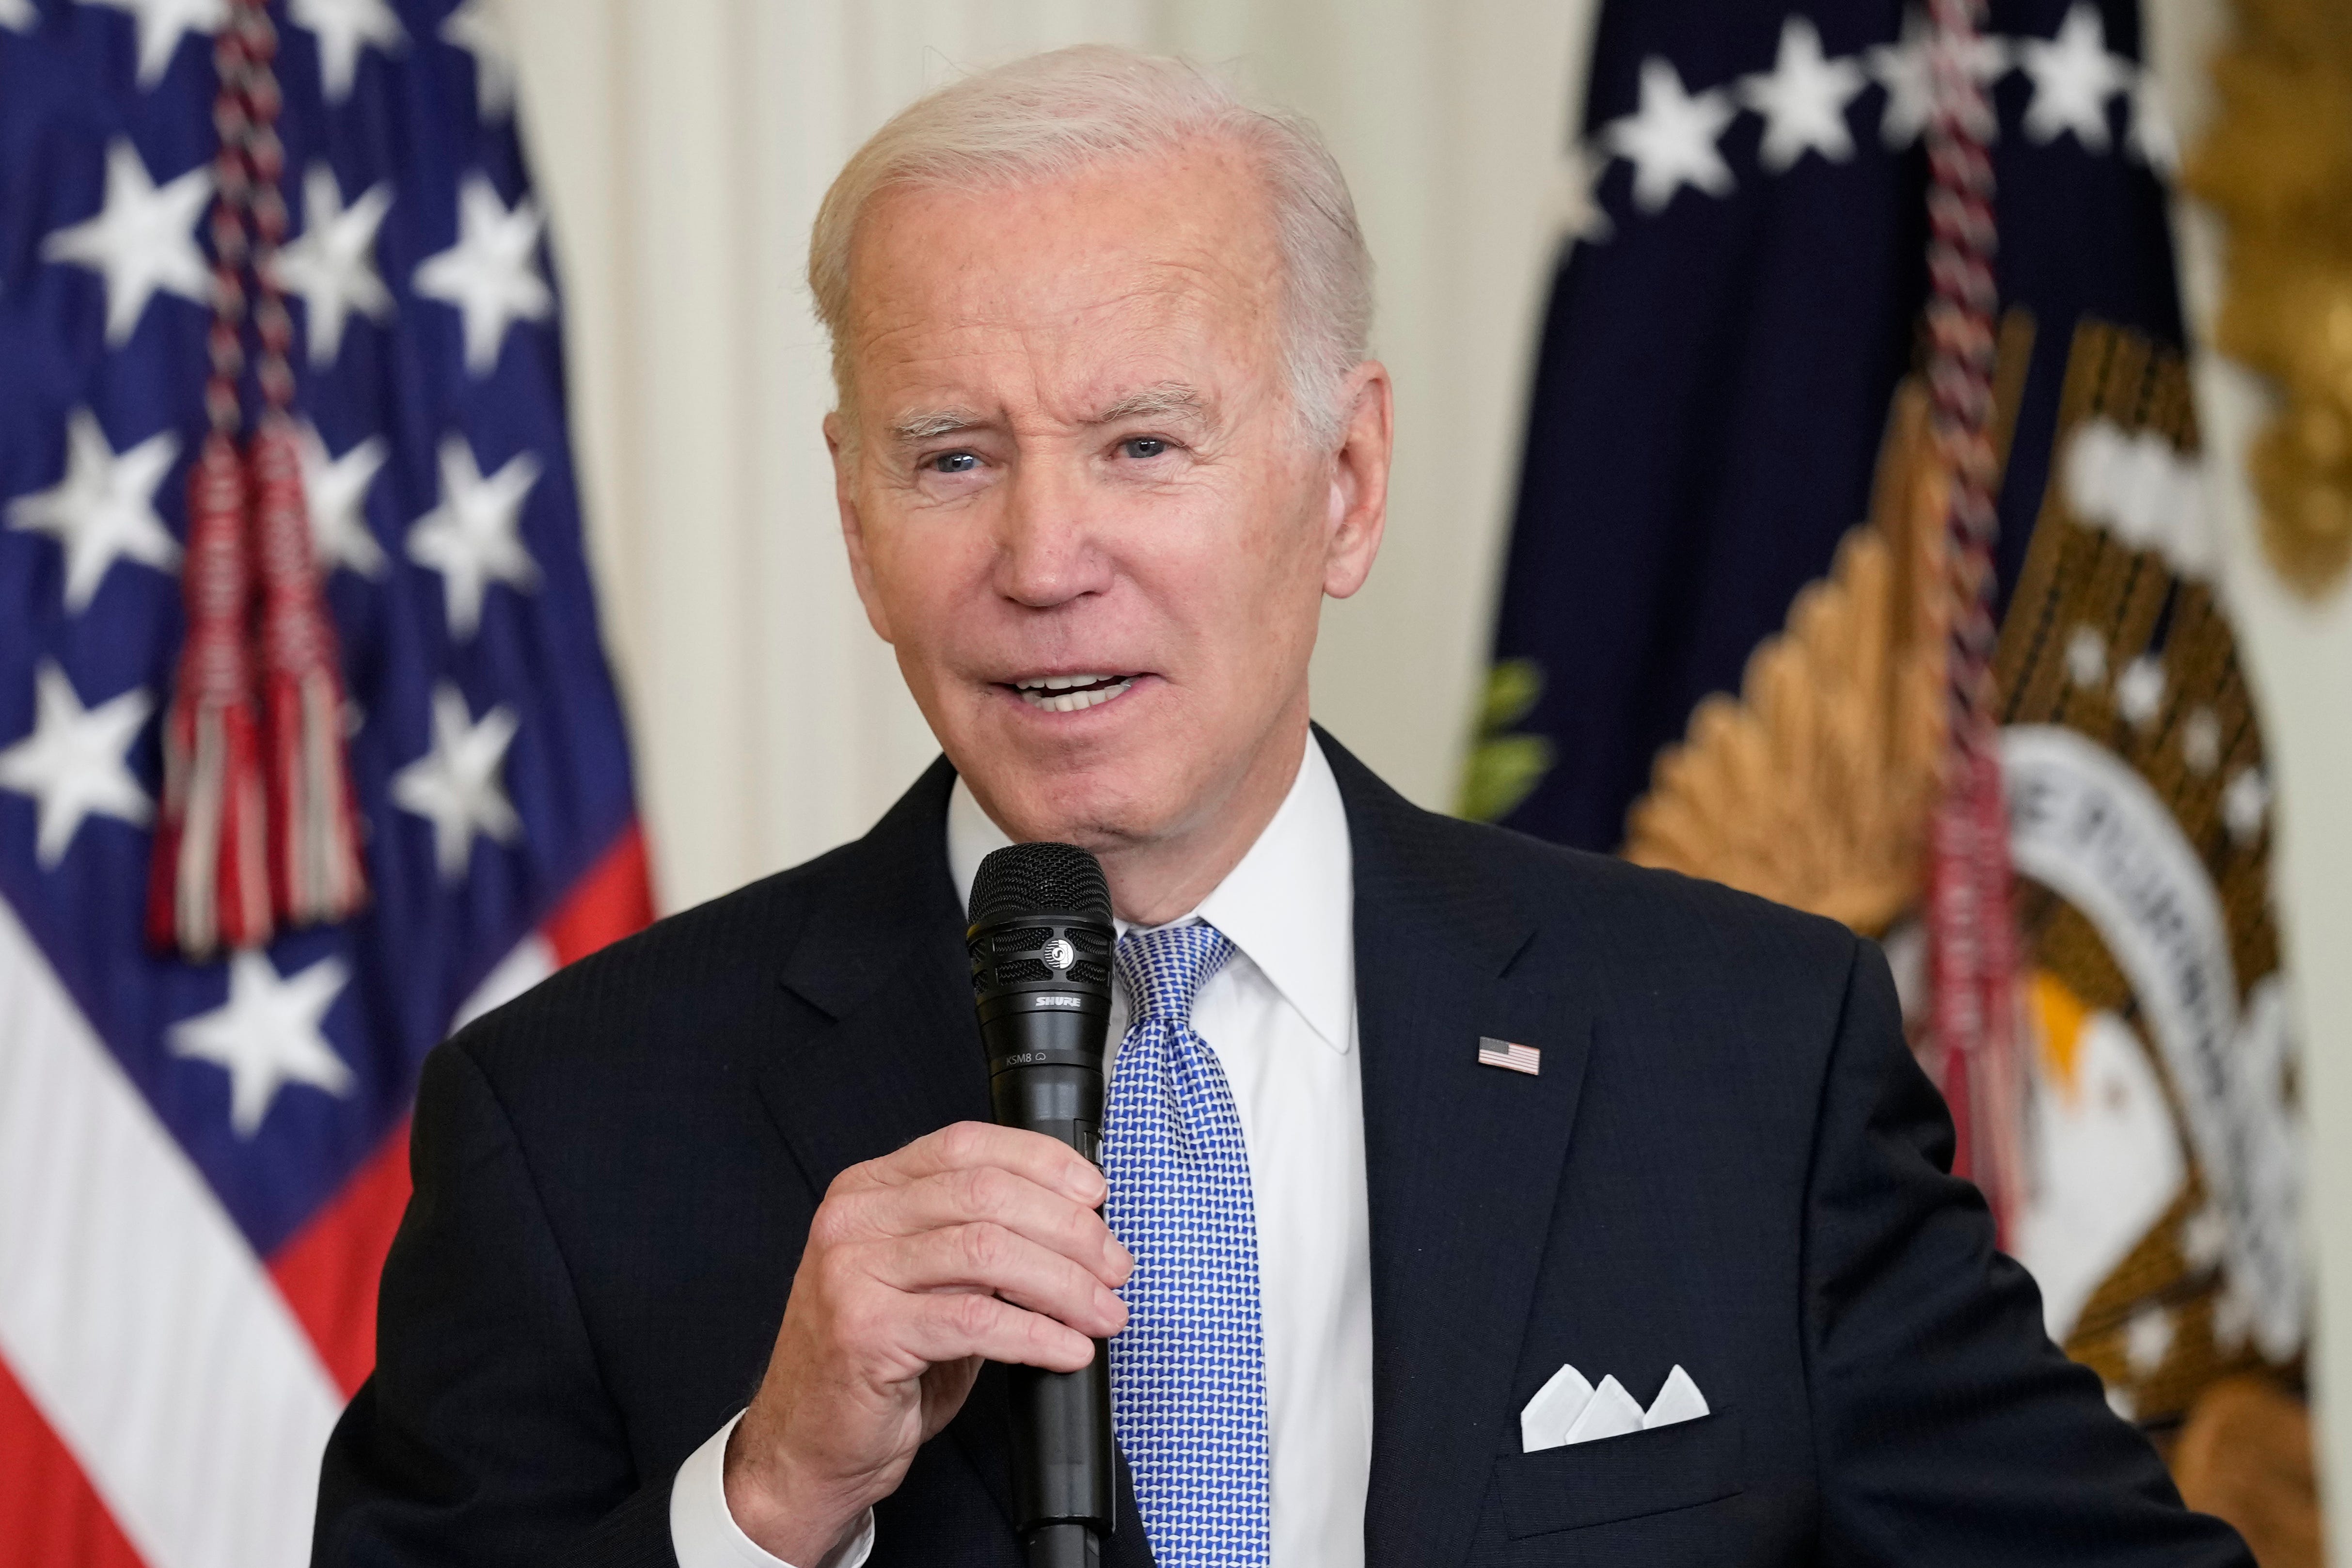 DOJ finds six more classified documents after search of Biden's Delaware home